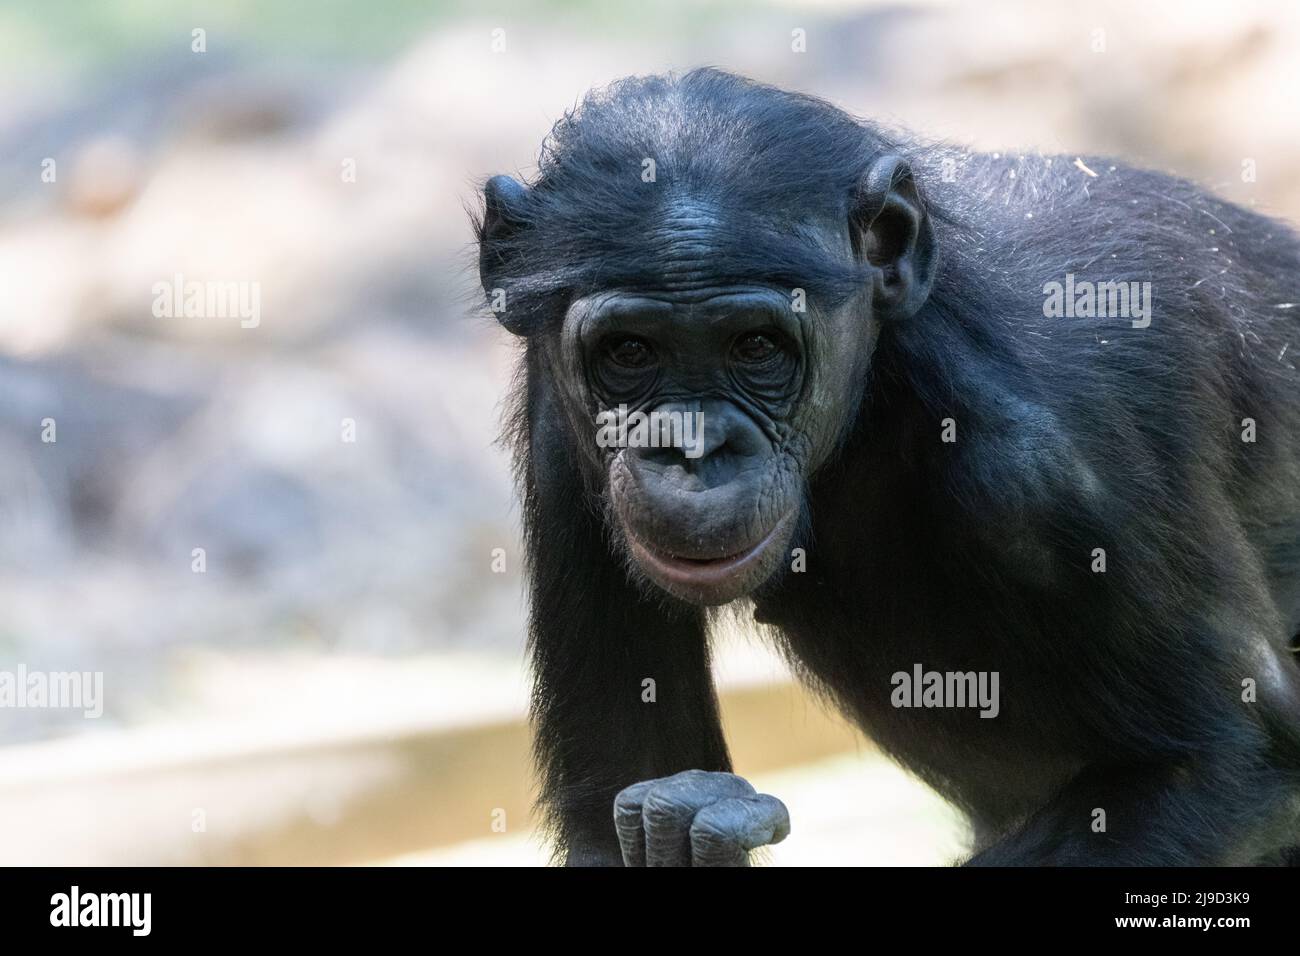 A cute juvenile Bonobo, close relative to humans and chimpanzees, staring at the camera with a look of curiosity on its face. Stock Photo